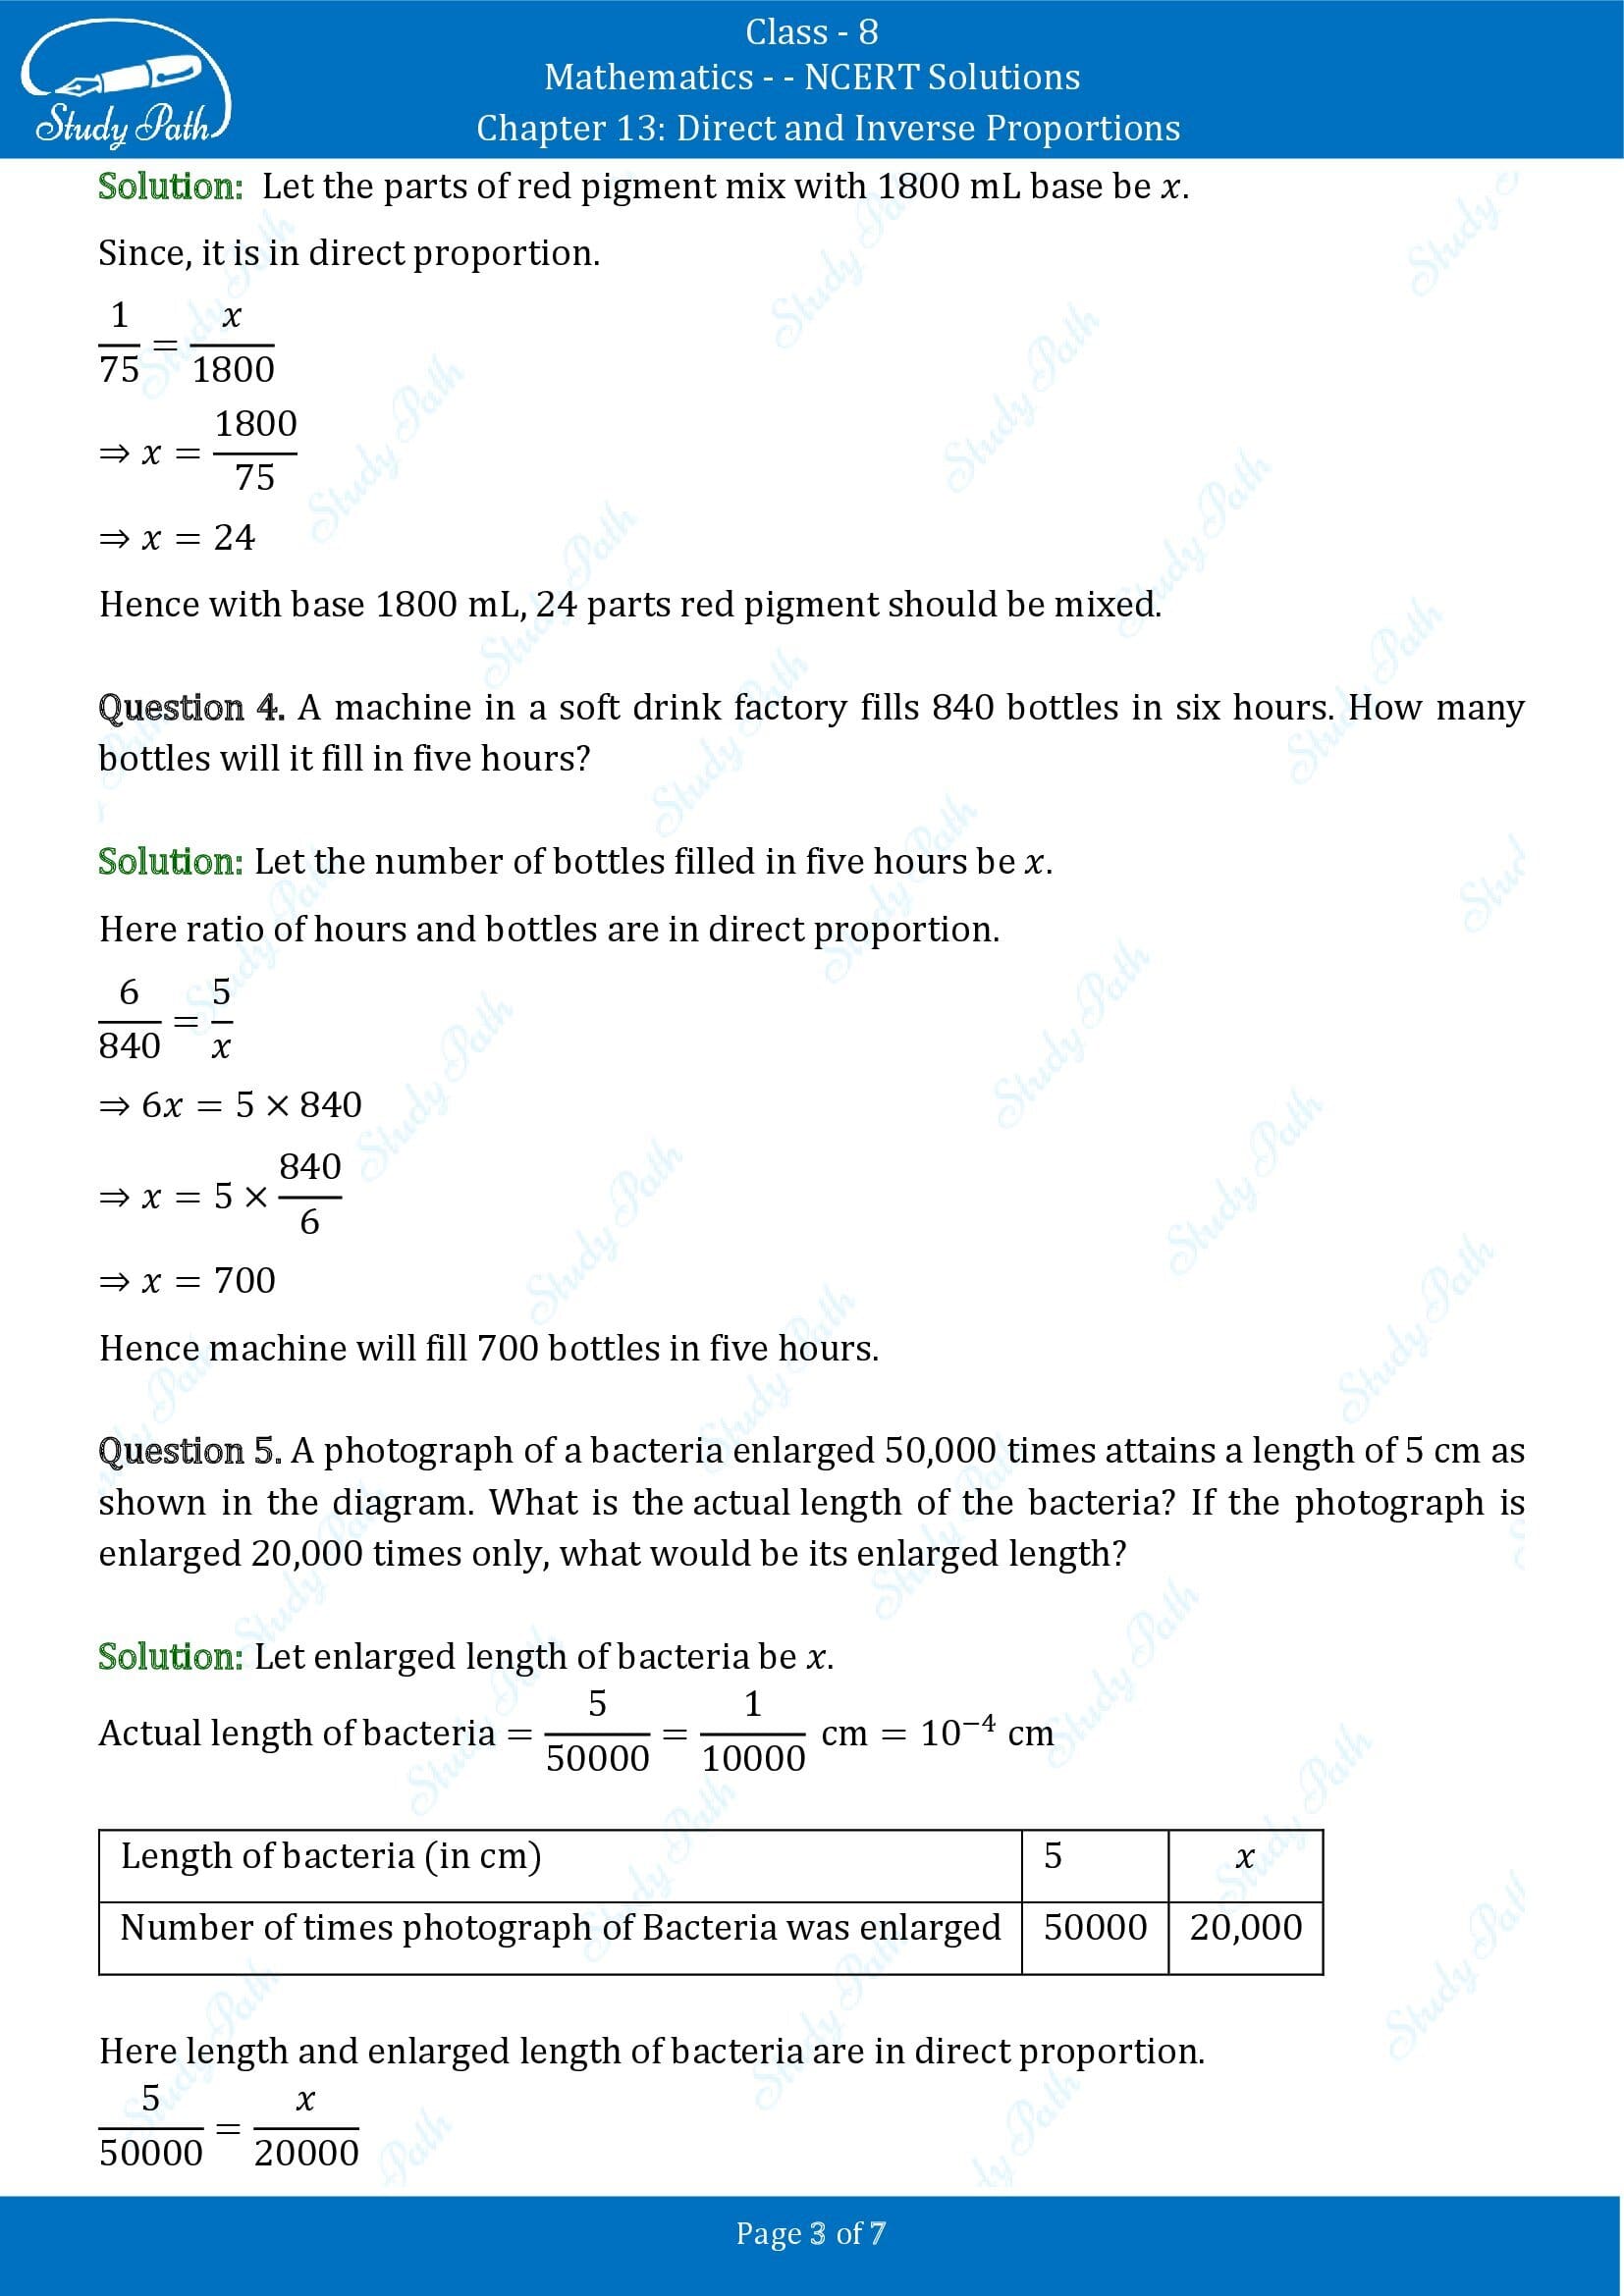 NCERT Solutions for Class 8 Maths Chapter 13 Direct and Inverse Proportions Exercise 13.1 00003